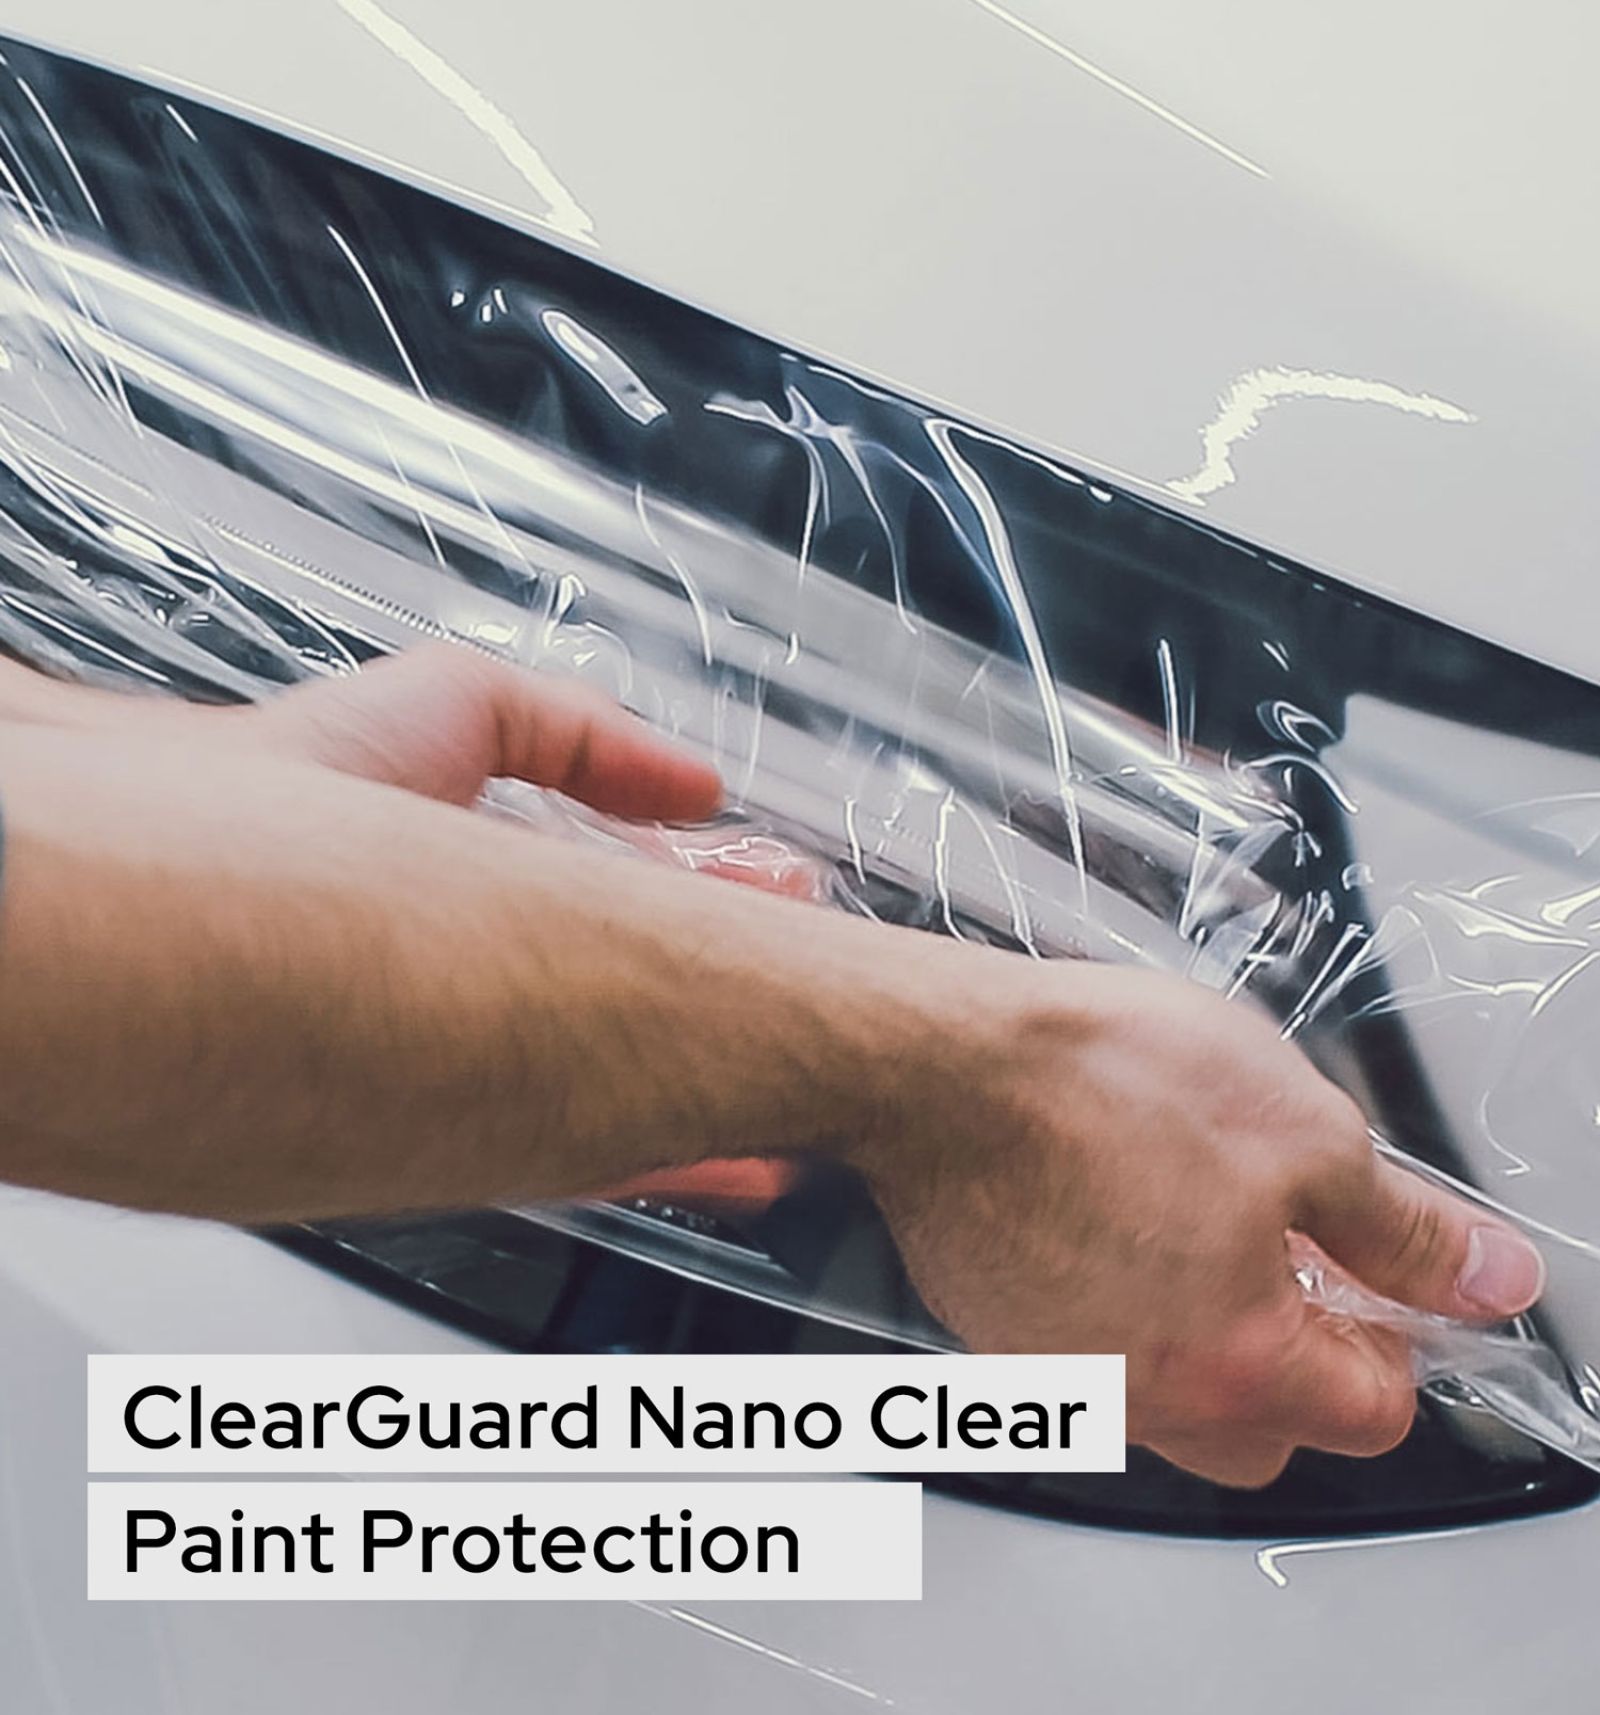 ClearGuard Nano Clear Paint Protection